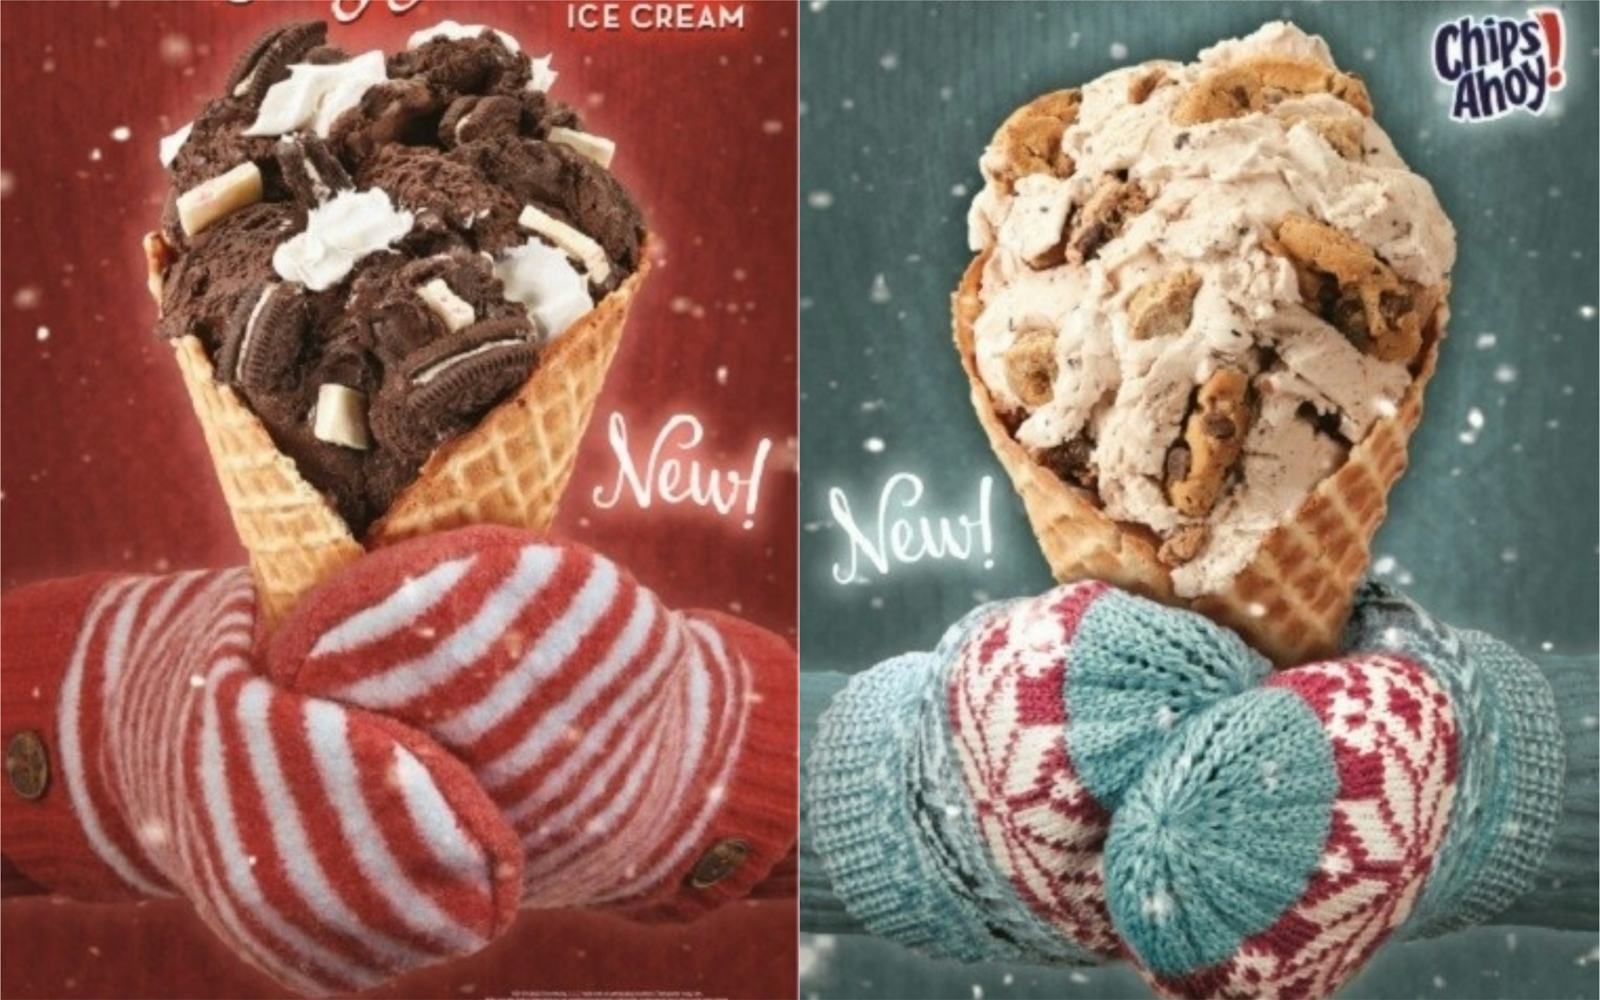 Cold Stone Creamery's Winter Flavors Include Remixes On Chips Ahoy & Oreos